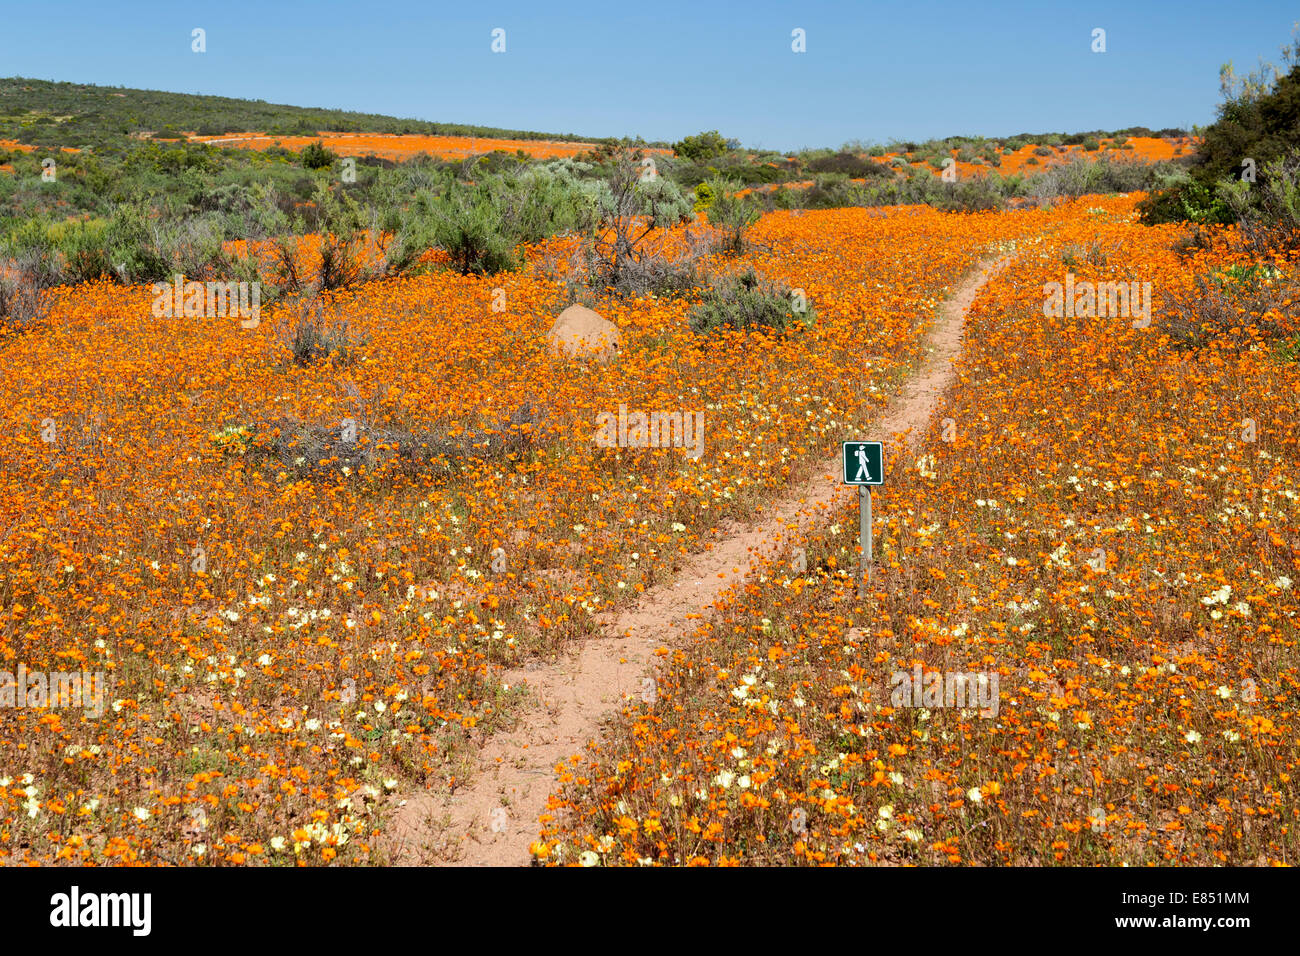 The Korhaan walking trail through fields of flowers in the Namaqua National Park in South Africa. Stock Photo